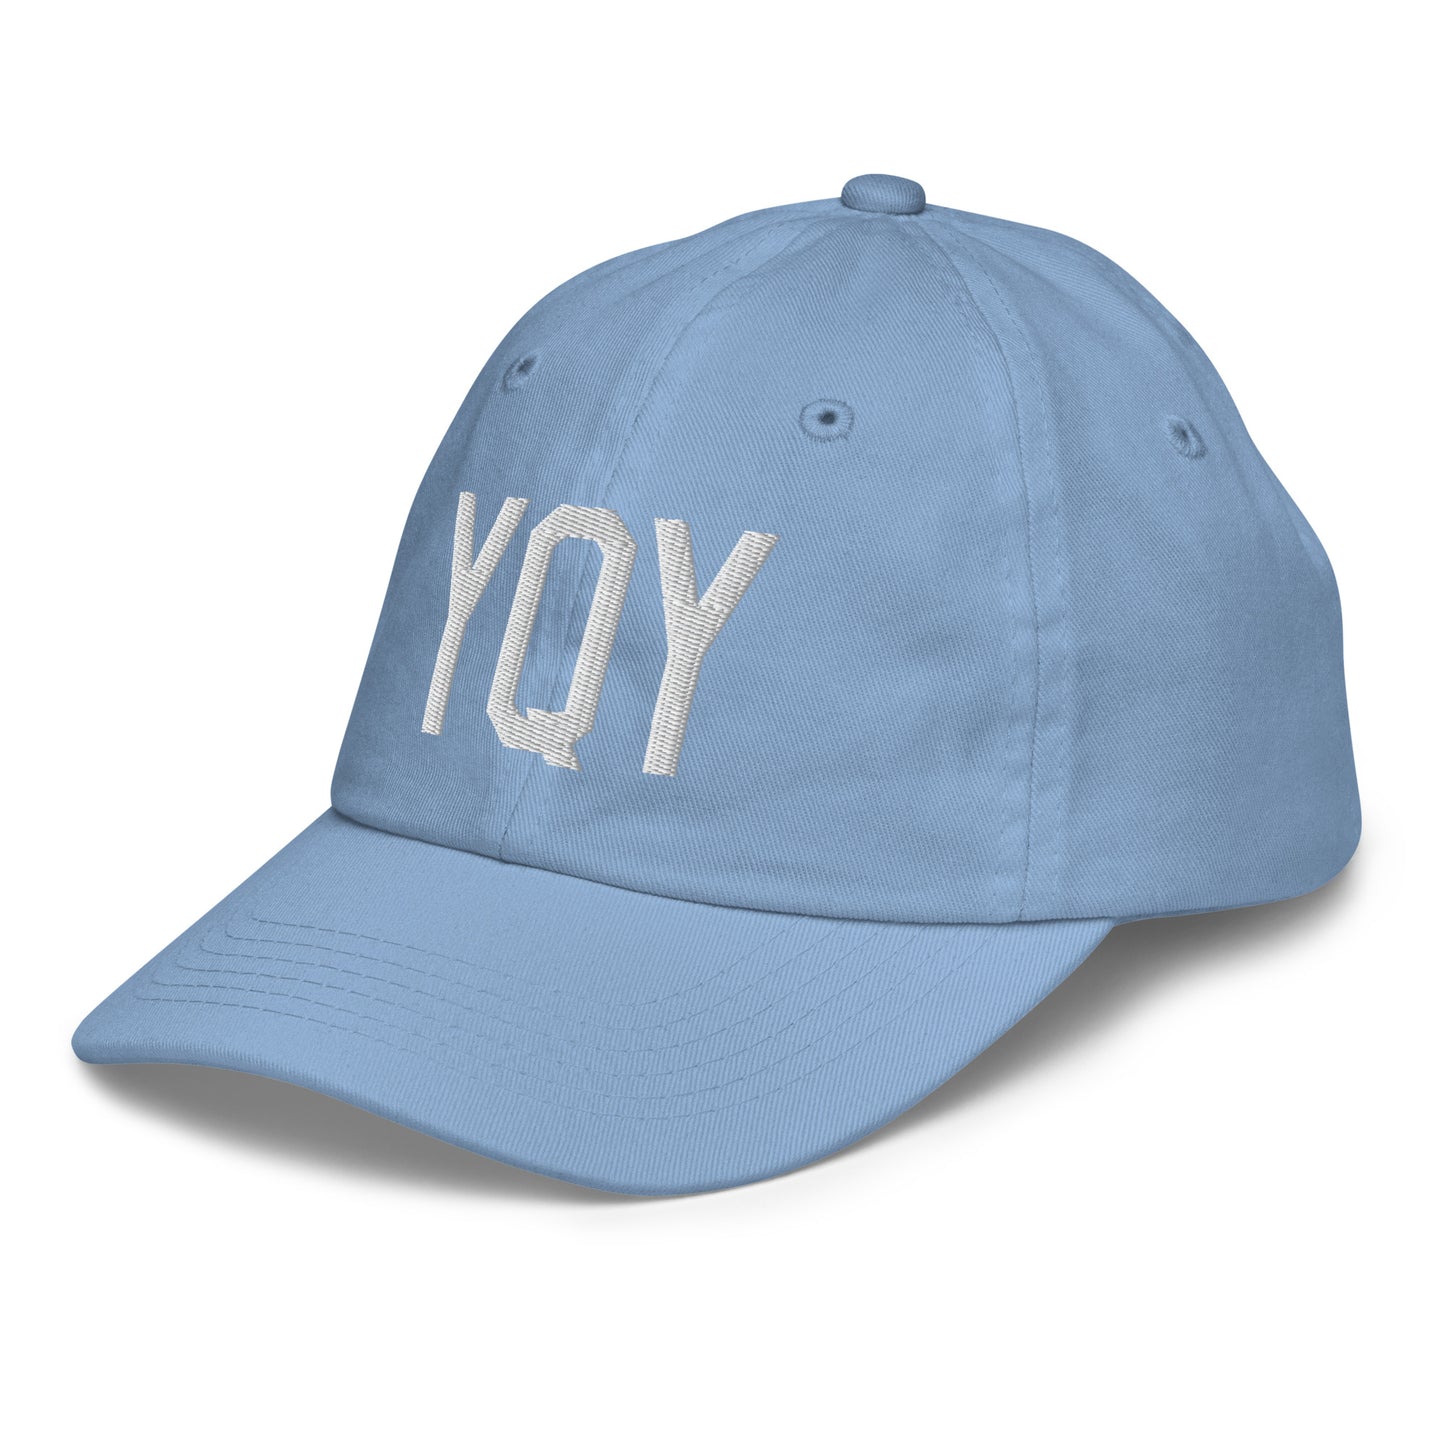 Airport Code Kid's Baseball Cap - White • YQY Sydney • YHM Designs - Image 24